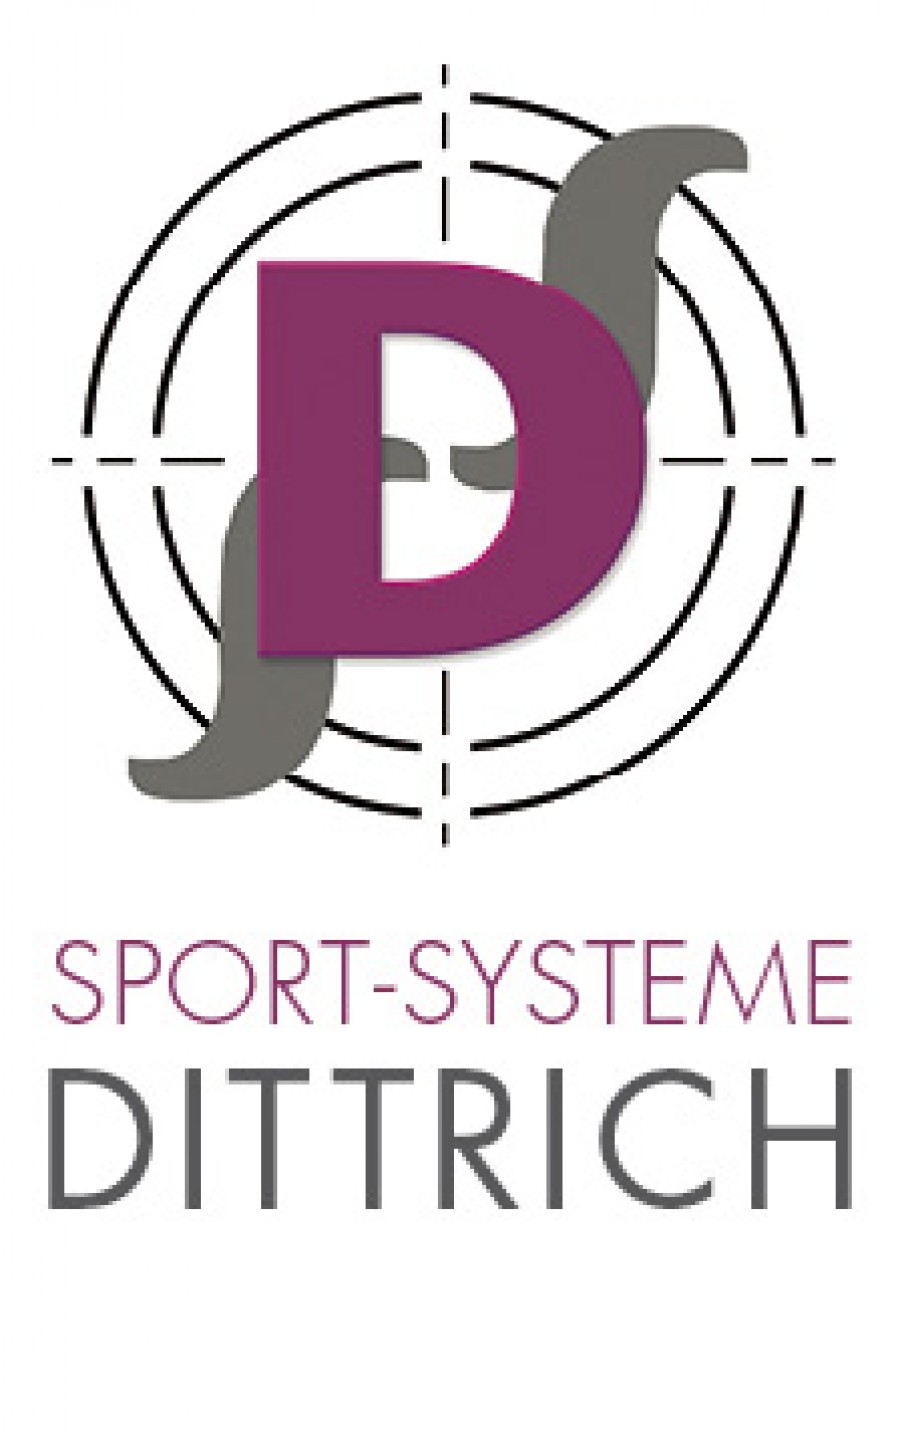 Sport System Dittrich